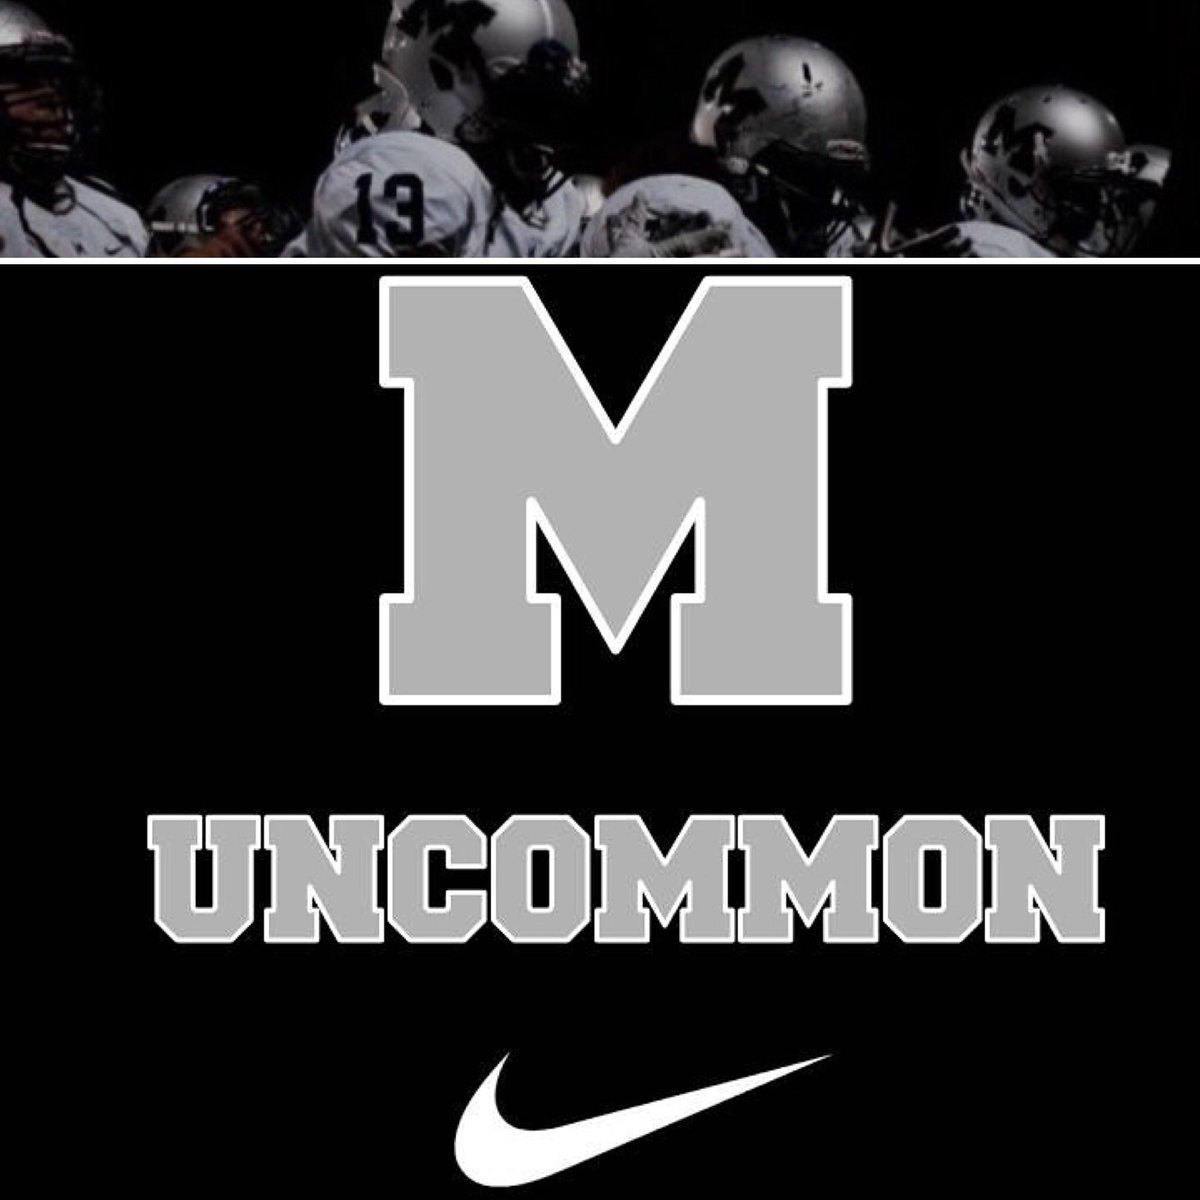 45-21 Over the #1 seed Chino Cowboys. @SoonsFootball moves on to the Semi-finals. #UNCOMMON